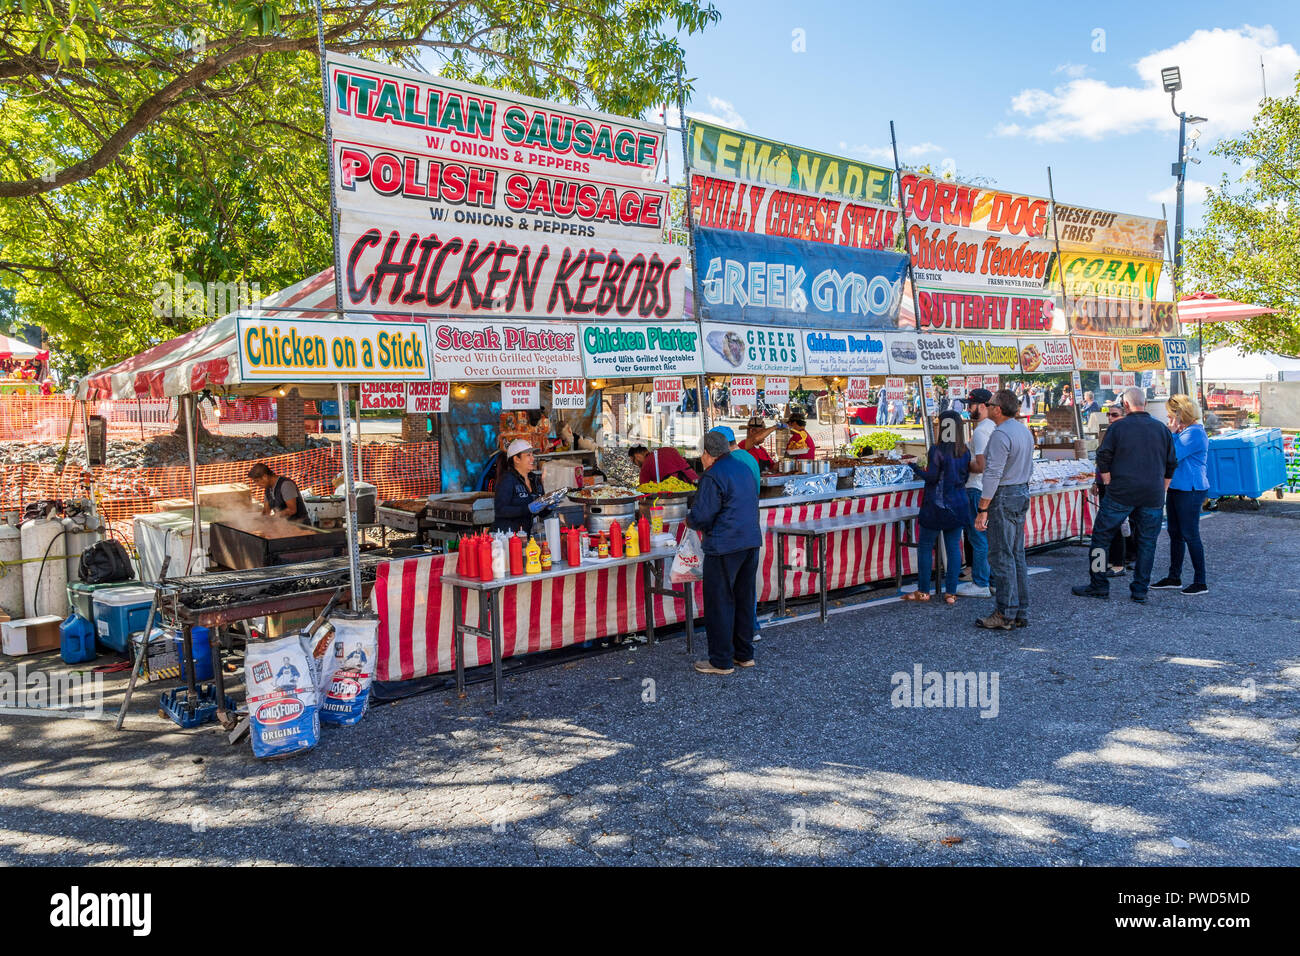 HICKORY, NC, USA-10/14/18: A concession stand at a local fall festival offers Itialian sausage and chicken kebobs.  Customers stand in line. Stock Photo